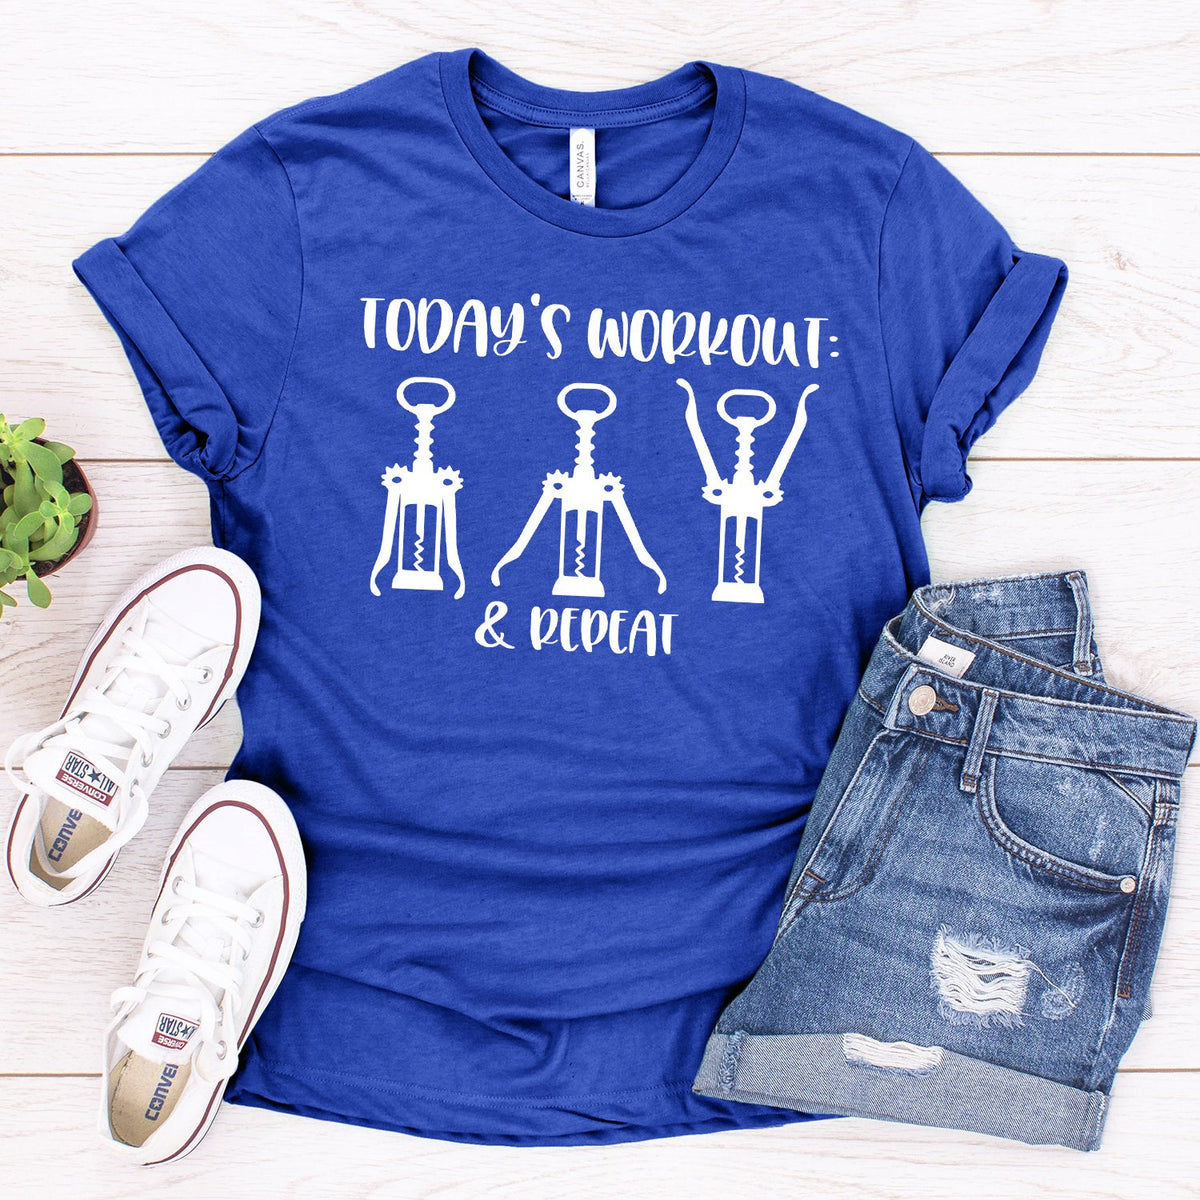 Today&#39;s Workout: Wine &amp; Repeat - Short Sleeve Tee Shirt